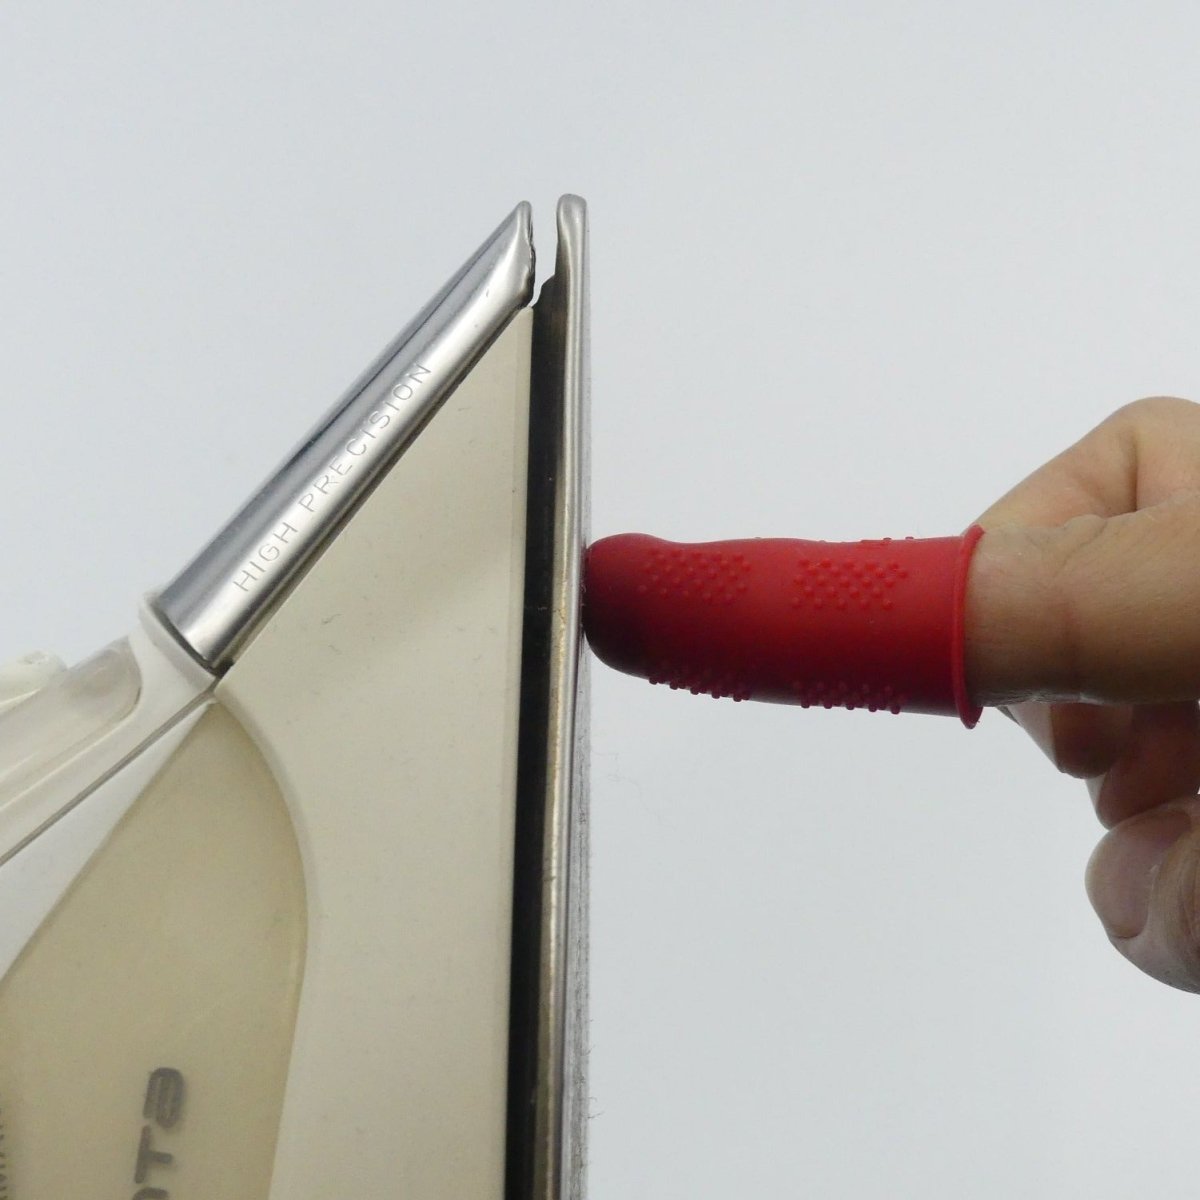 Touching the bottom plate of an iron with an Ironing Thimble encased finger